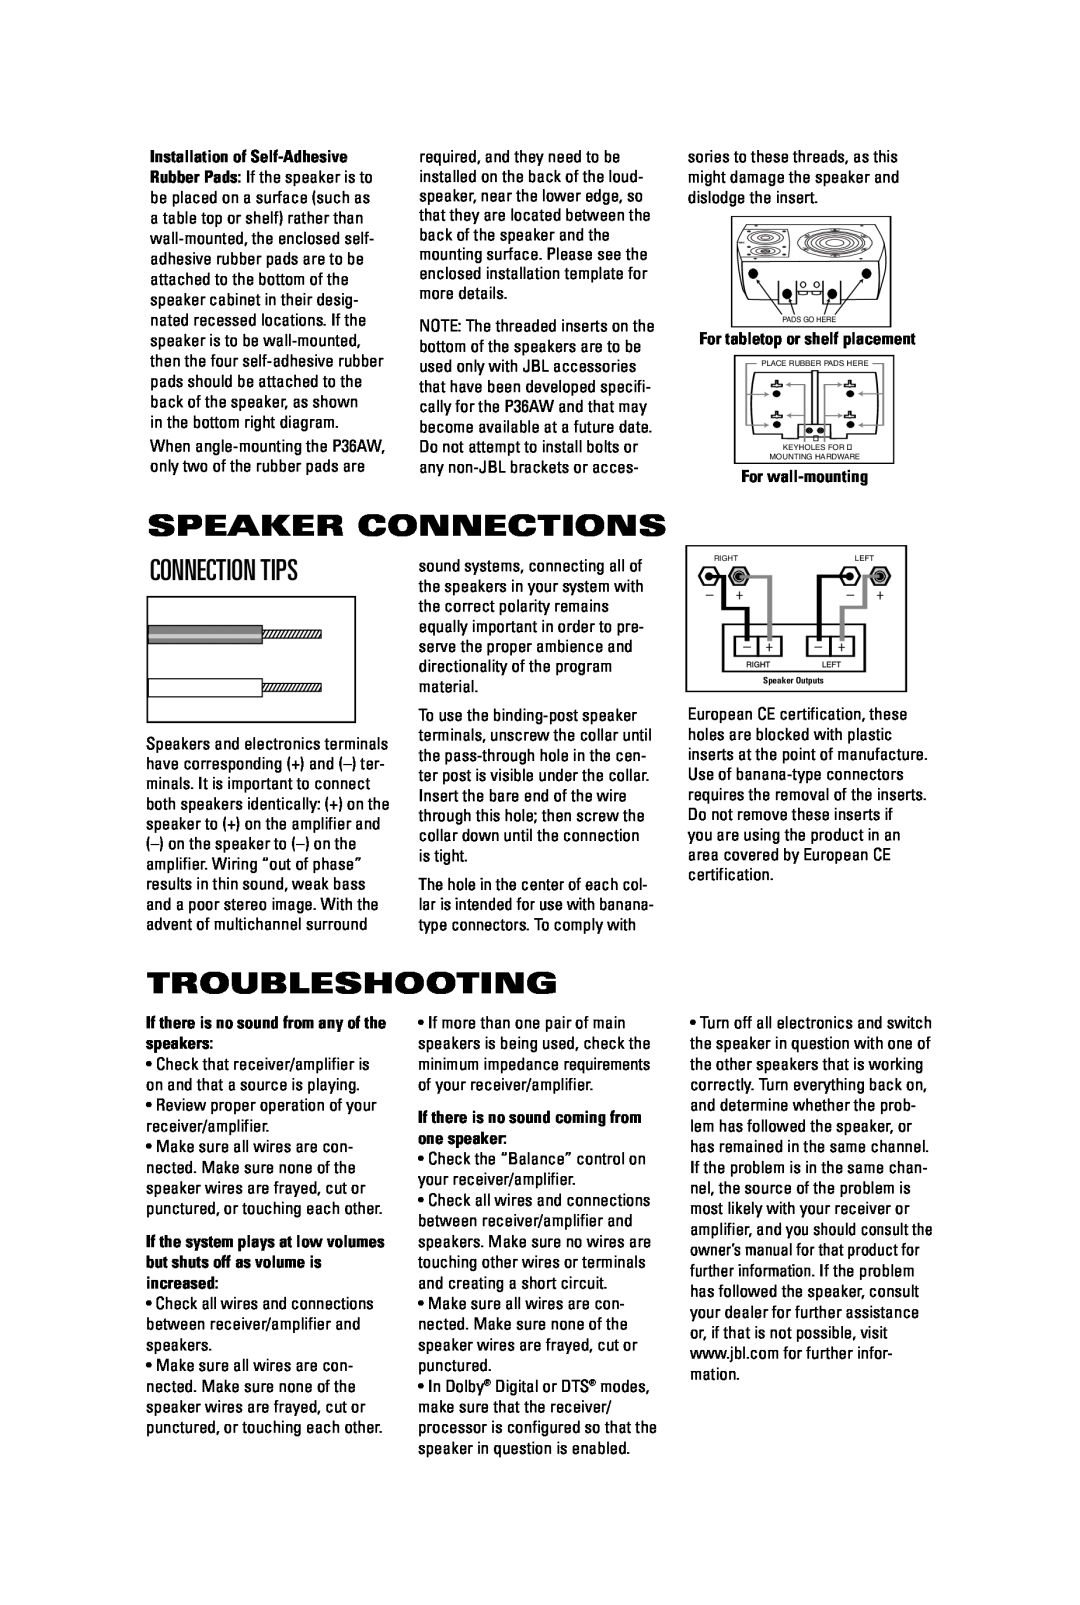 JBL P36AW manual Speaker Connections, Troubleshooting, Connection Tips, For tabletop or shelf placement, For wall-mounting 